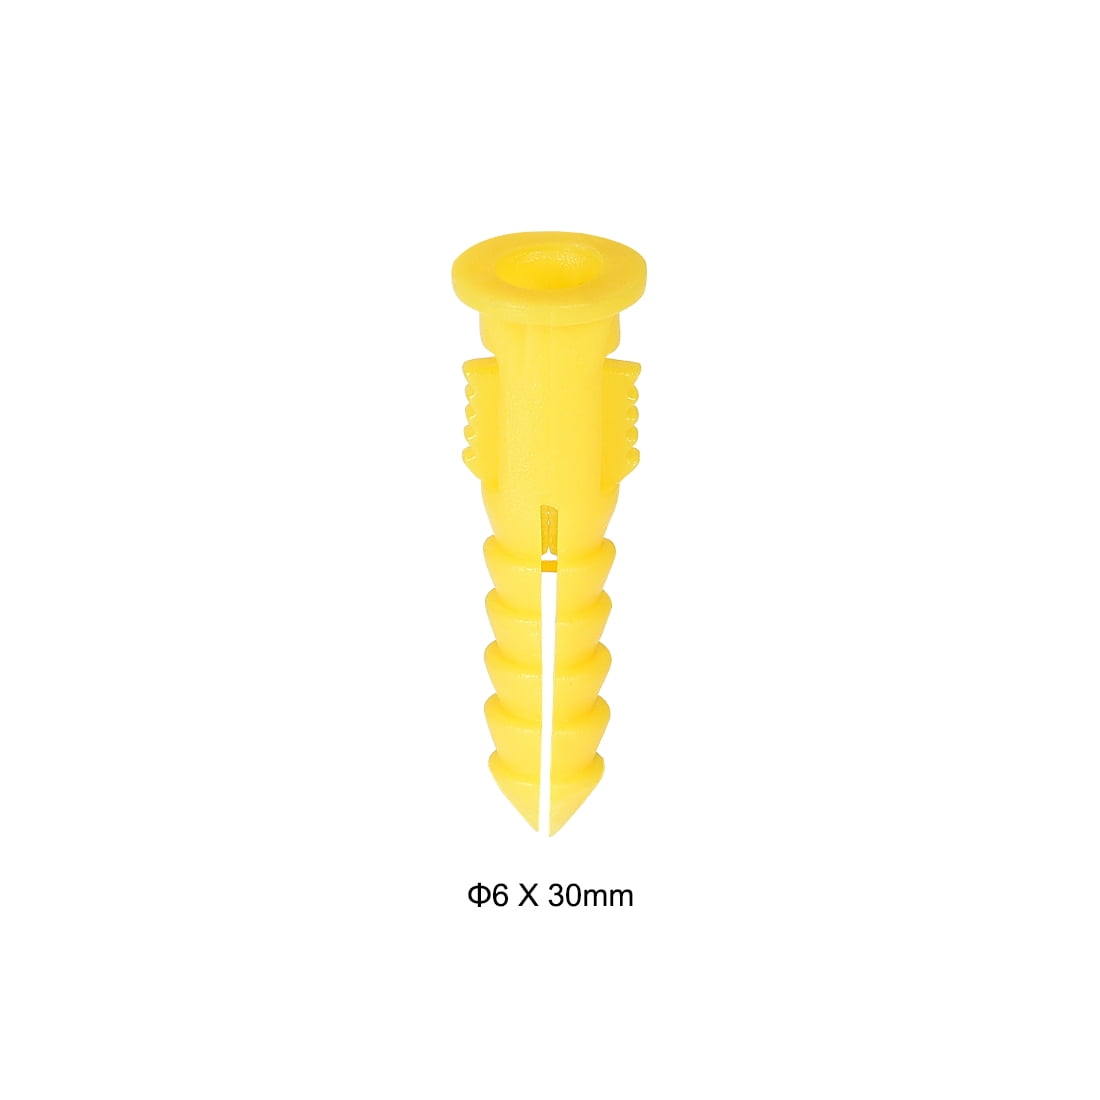 6mmx30mm Plastic Expansion Pipe Wall Anchor Screw Yellow 100pcs 